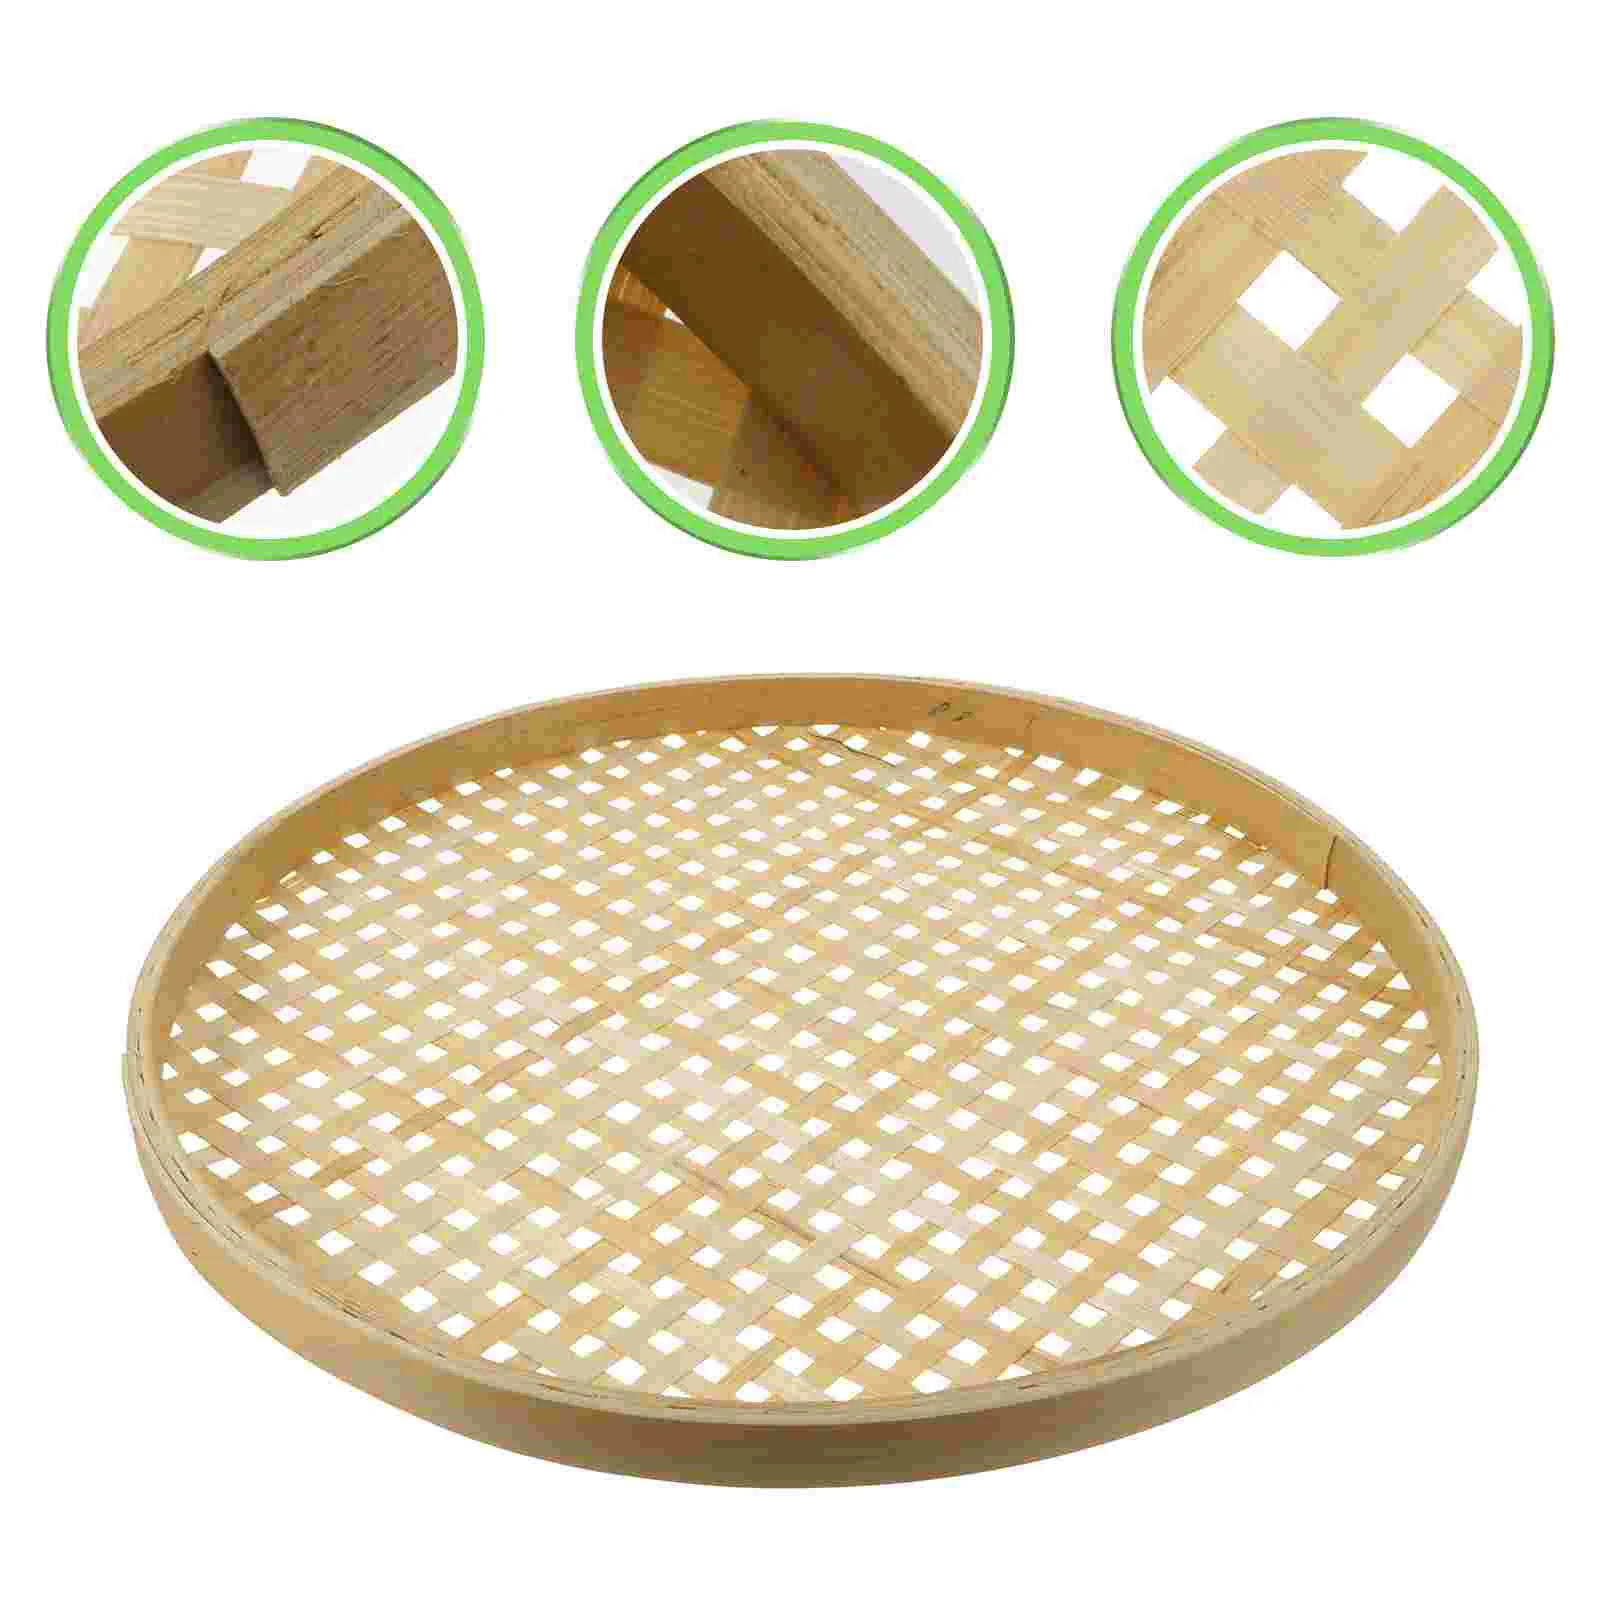 

Basket Tray Bamboo Fruit Woven Wicker Baskets Serving Storage Sieve Round Flat Shallow Bread Weaving Snack Vegetable Farmhouse